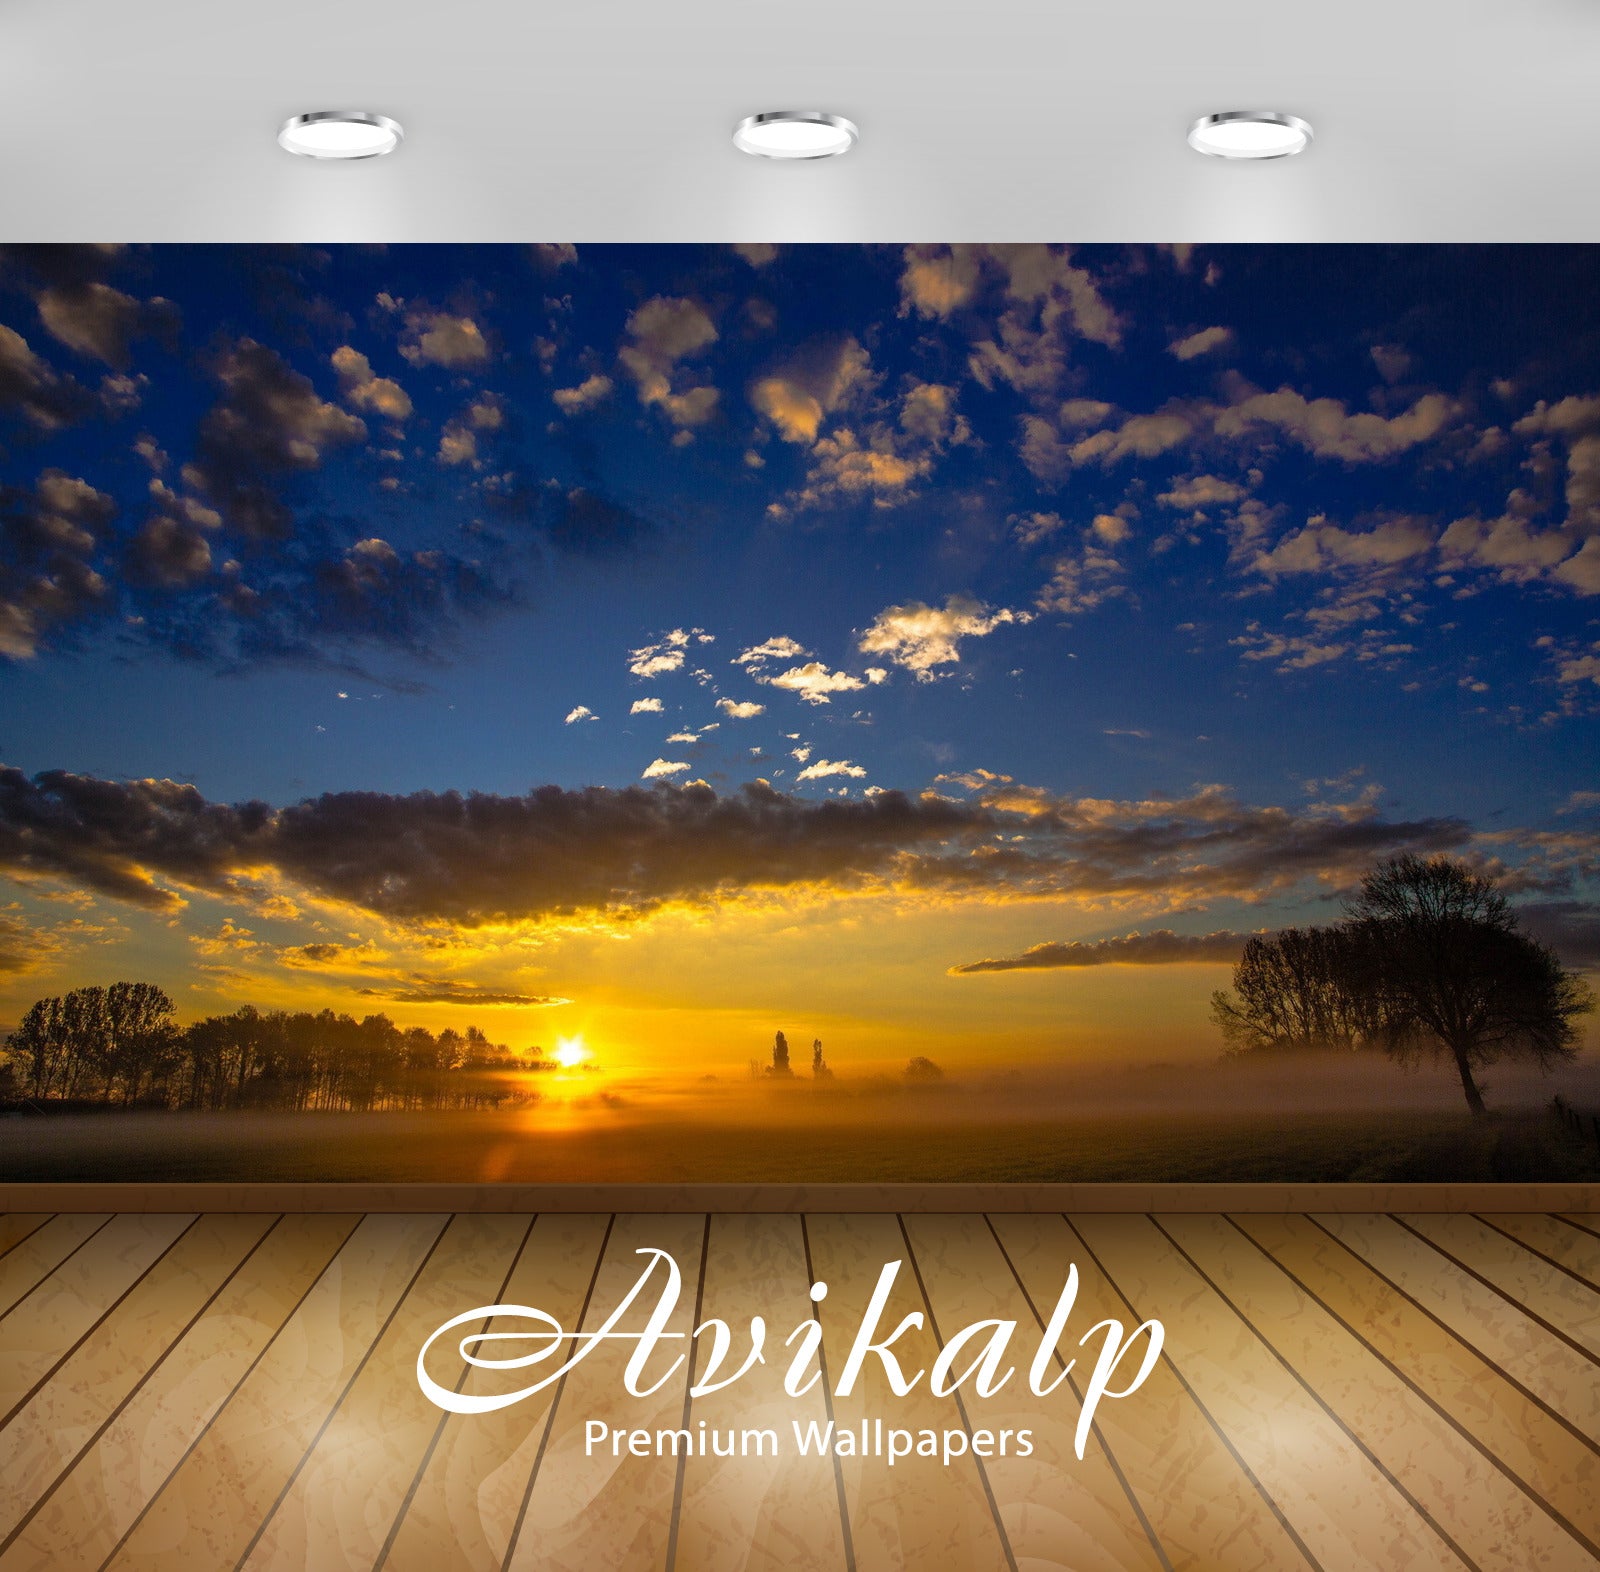 Avikalp Exclusive Awi6536 Superb Sunset Sky Nature Full HD Wallpapers for Living room, Hall, Kids Ro